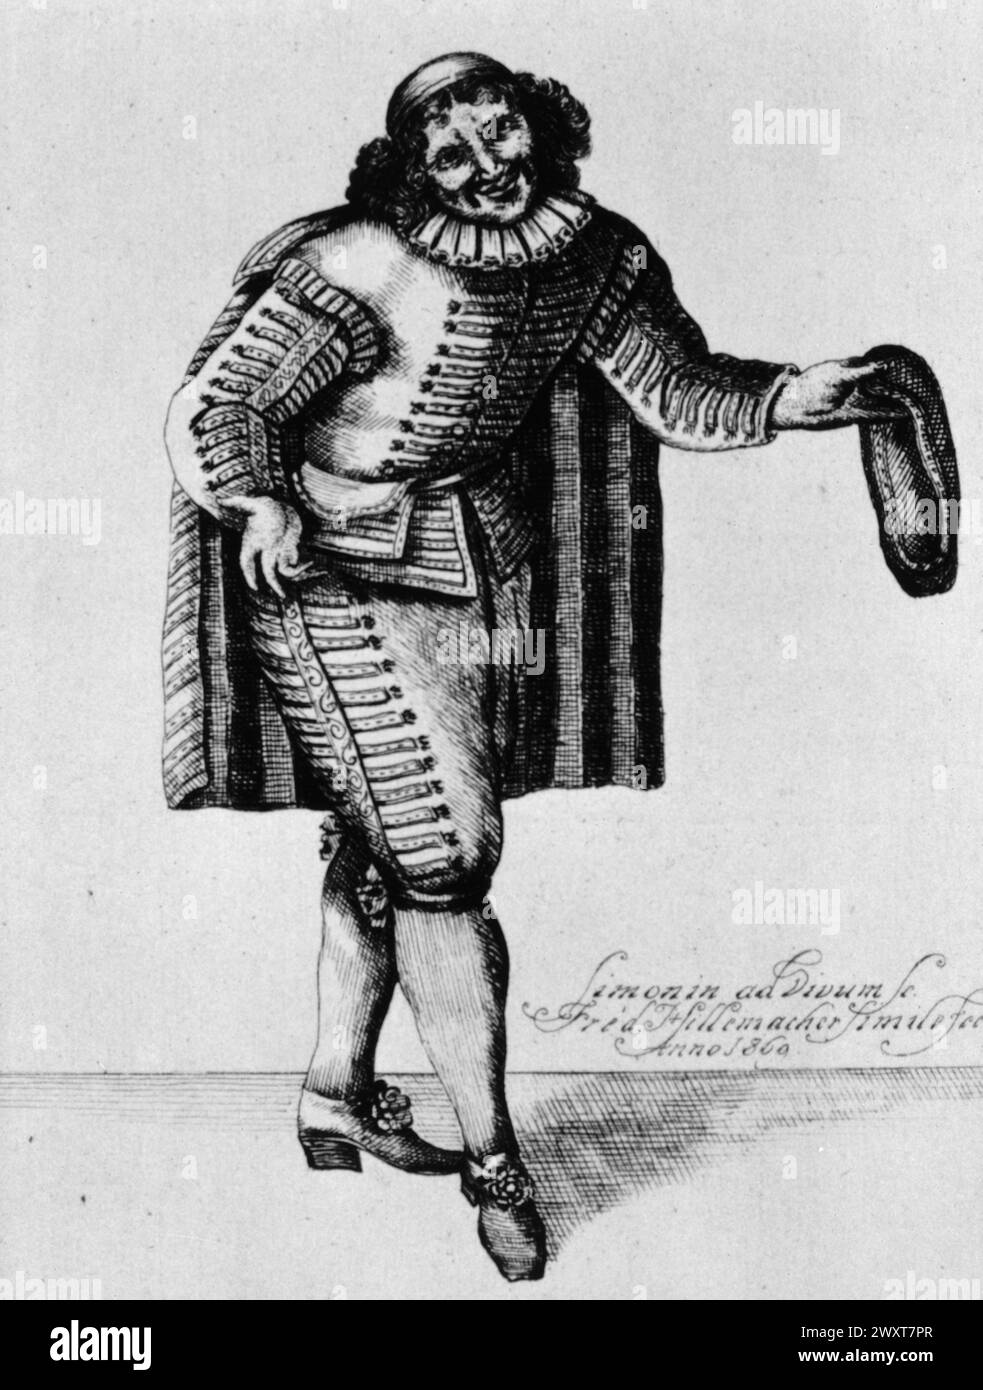 French playwriter Moliere in the costume of the character Sganarelle, illustration, 17th century Stock Photo